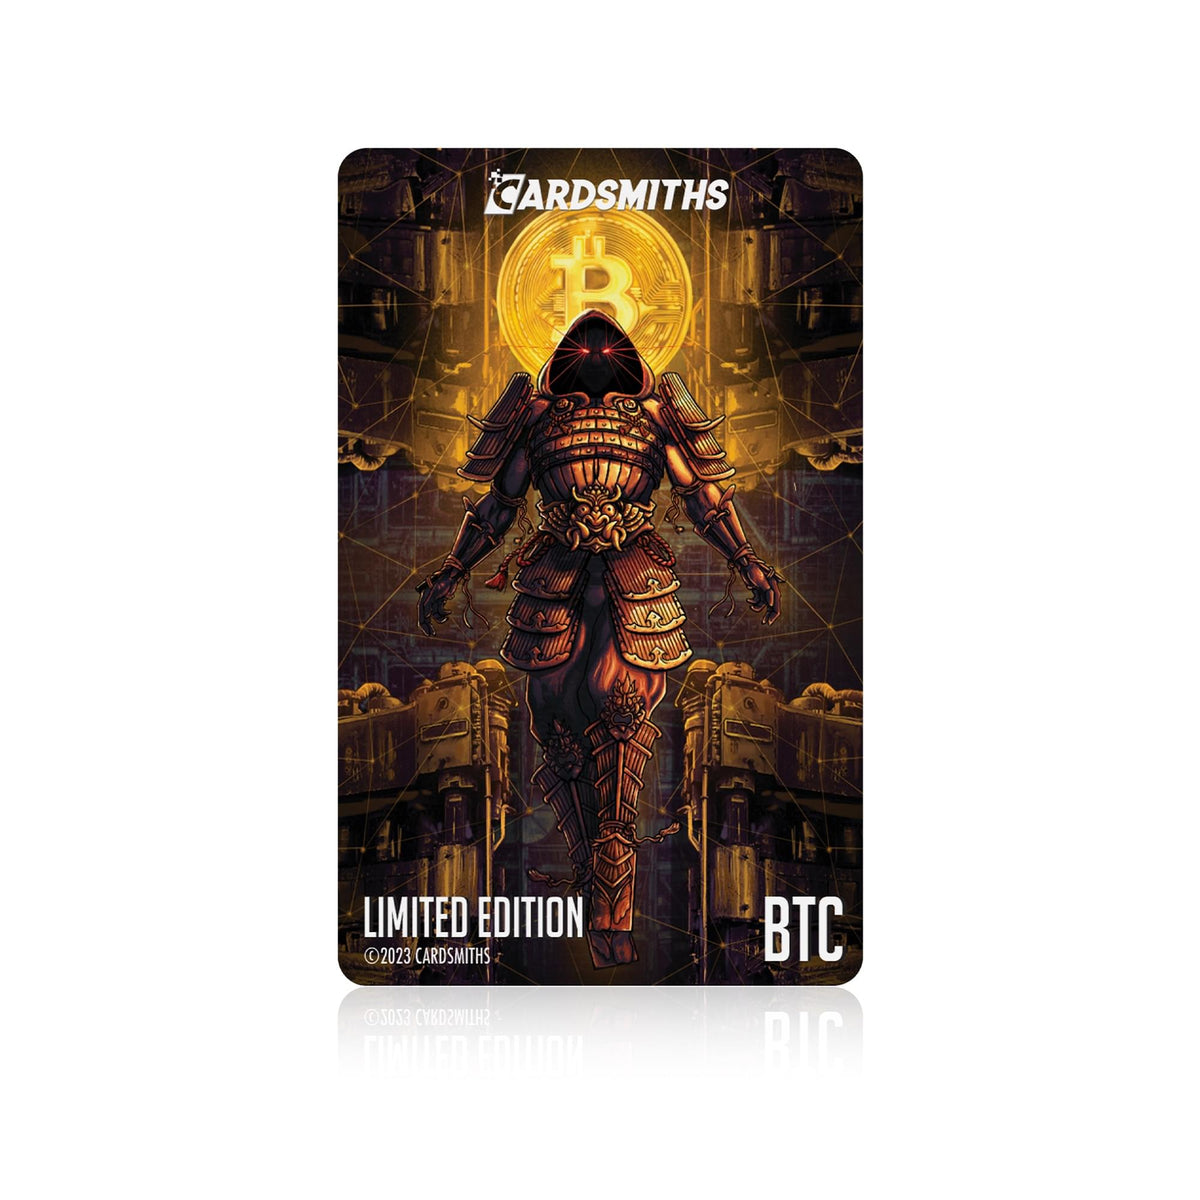 Cardsmiths Bitcoin Ballet Limited Edition Wallet Card